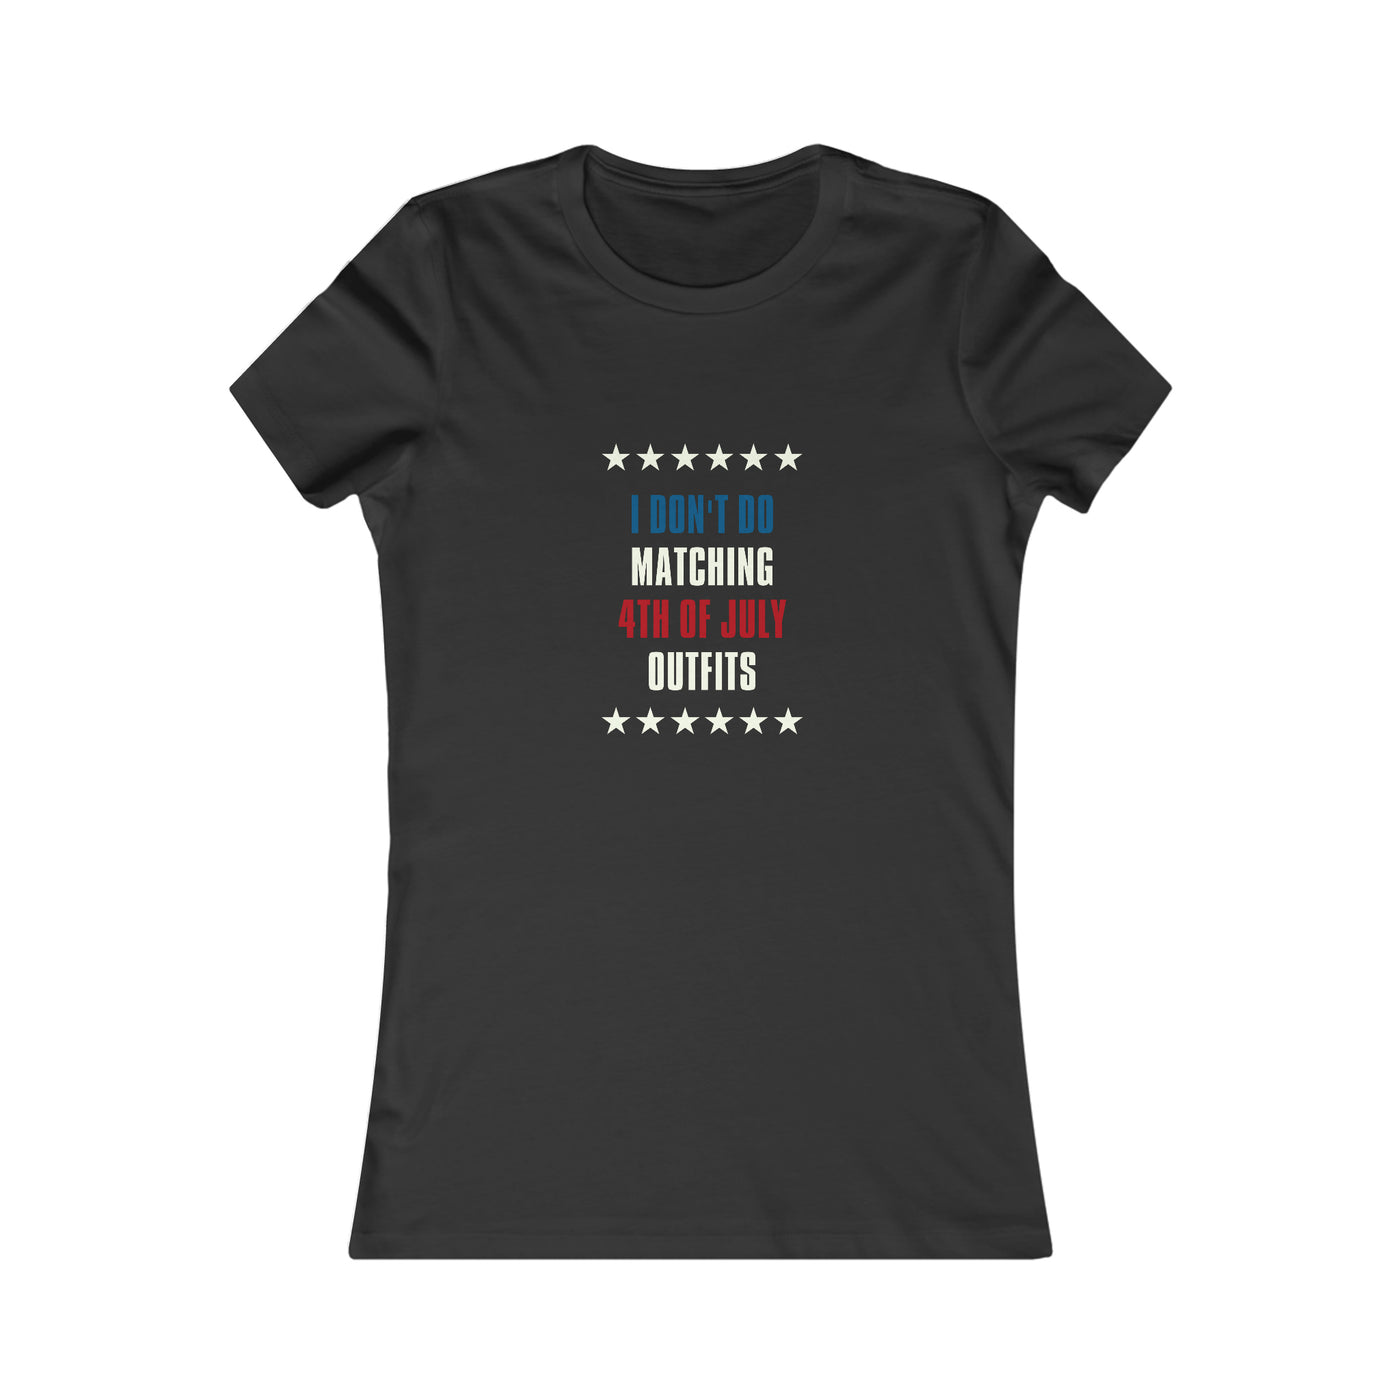 I Don't Do Matching Fourth of July Outfits Women's Favorite Tee